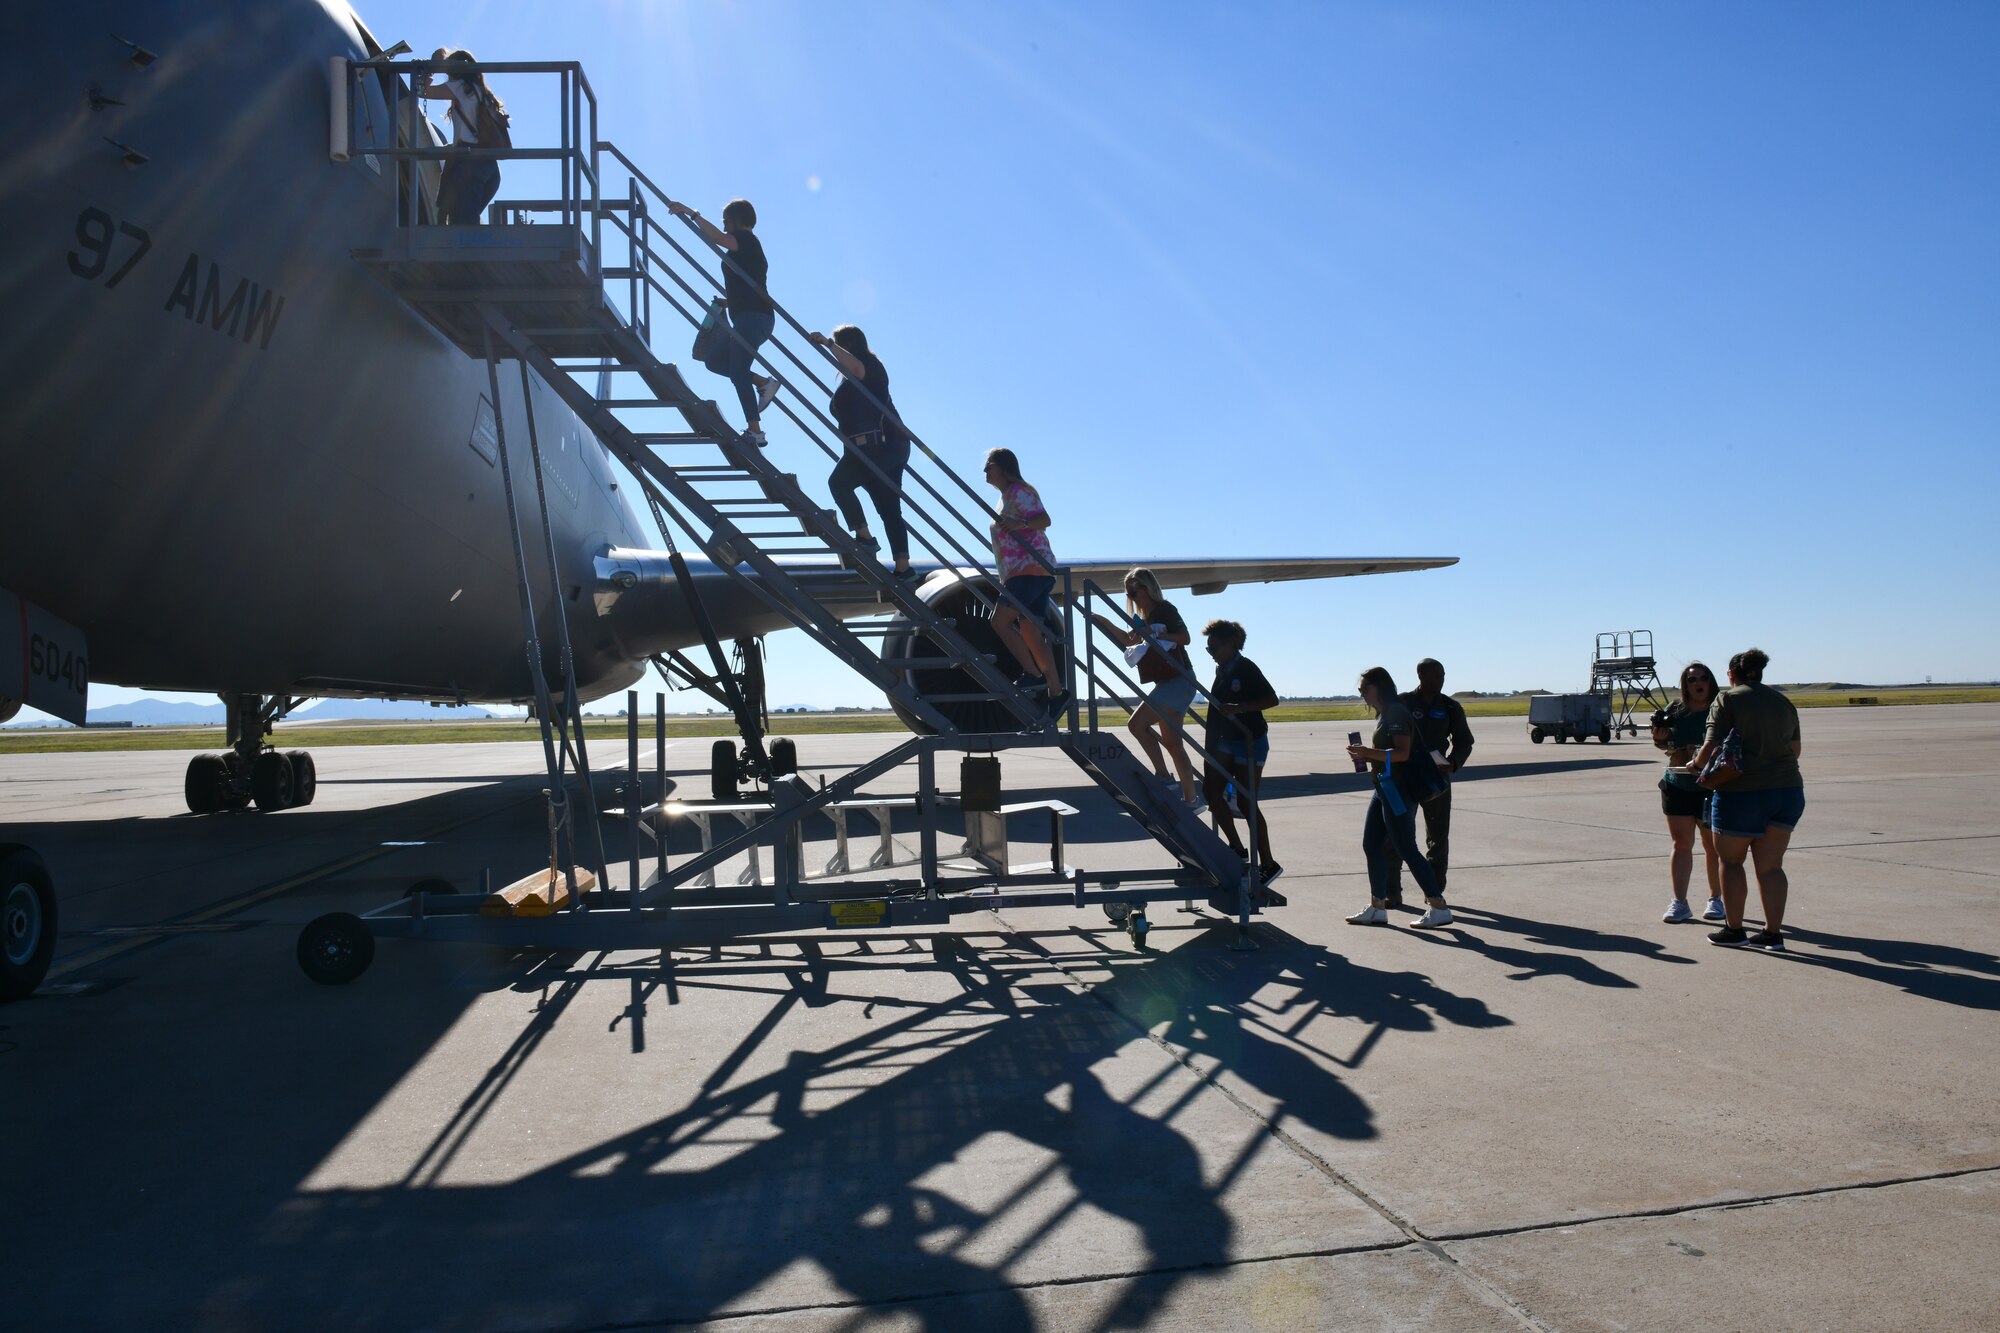 Spouses of 97th Air Mobility Wing Airmen board a KC-46 Pegasus at Altus Air Force Base (AAFB), Oklahoma, July 11, 2022. The KC-46 is one of two aerial refueling aircraft at AAFB, the other being the KC-135 Stratotanker. (U.S. Air Force photo by Airman 1st Class Miyah Gray)